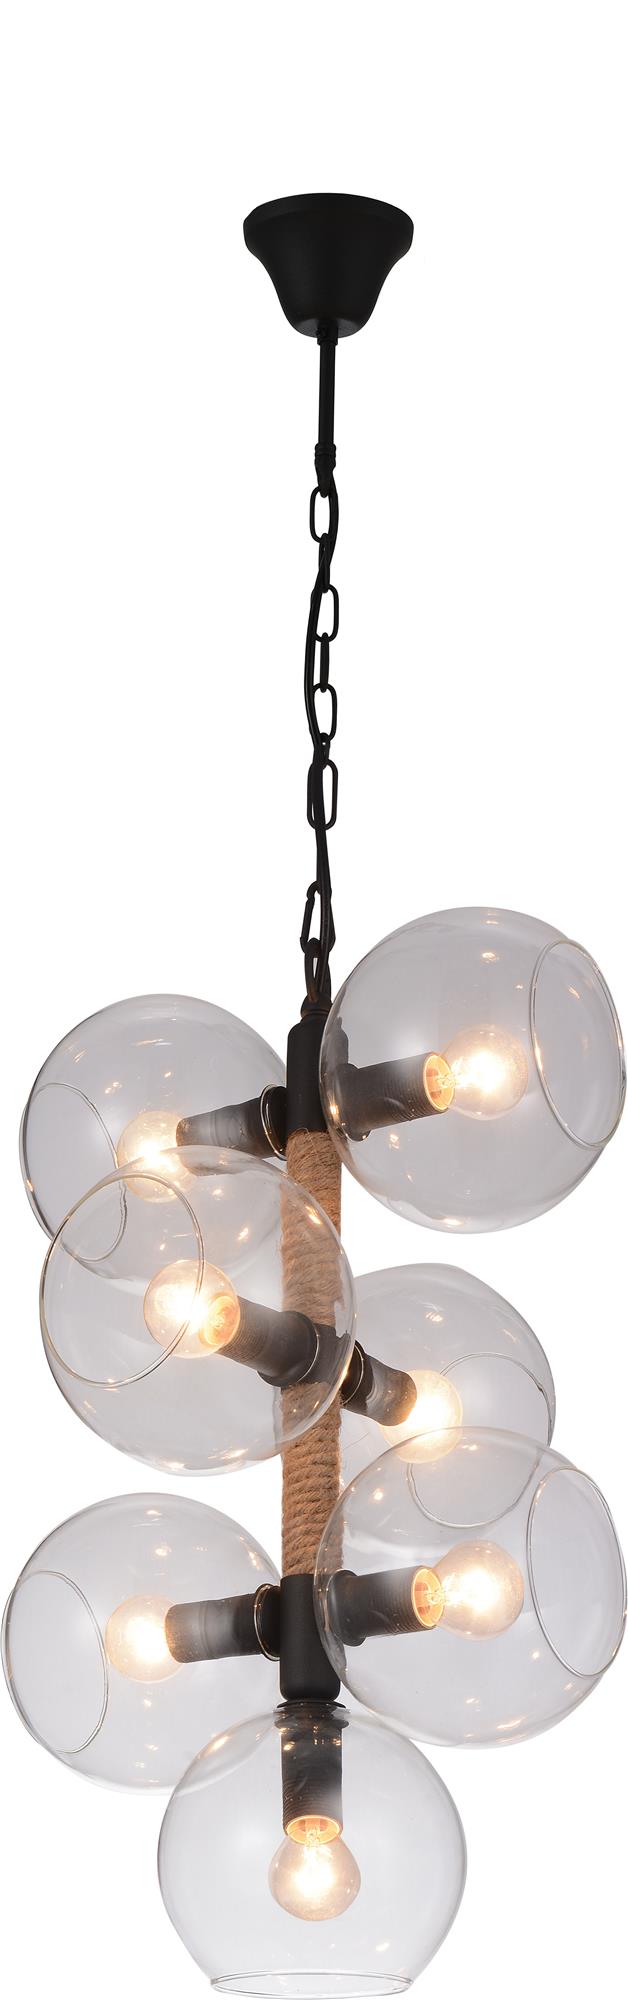 Okee Pendant Ceiling Lamp with Round Glass - Black